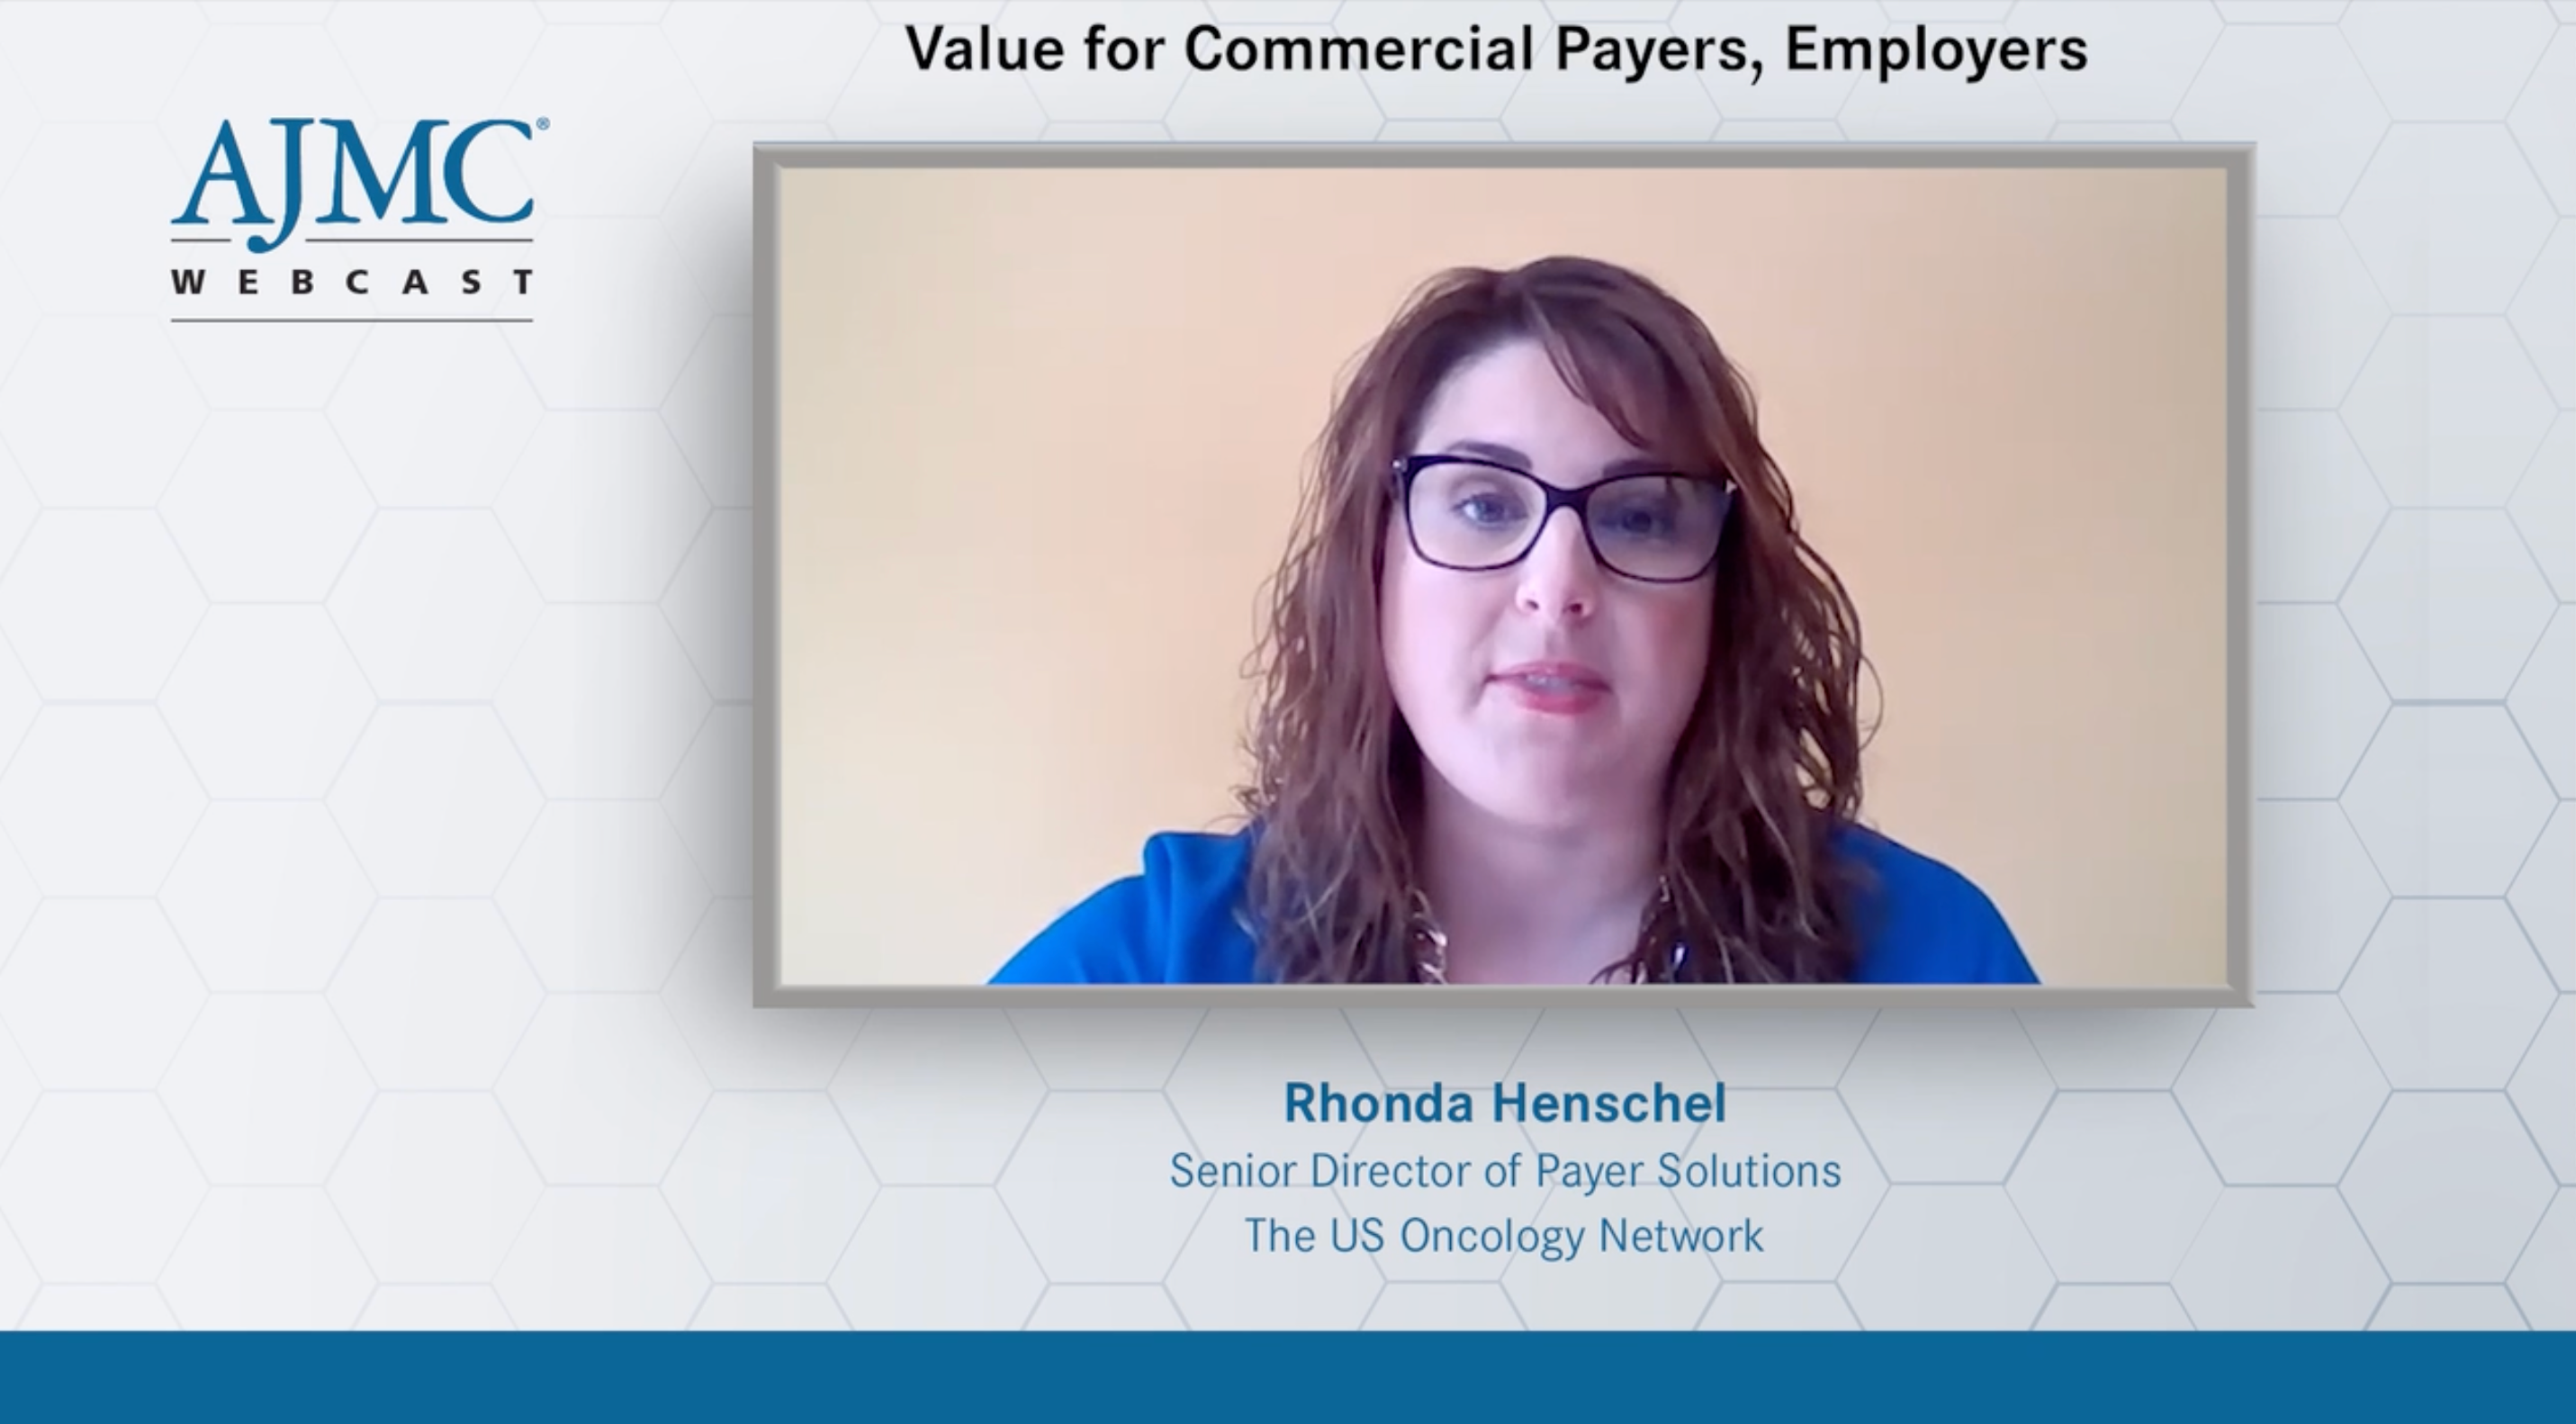 Beyond the OCM: How Are Commercial Payers & Employers Delivering Value-Based Cancer Care? Part 2